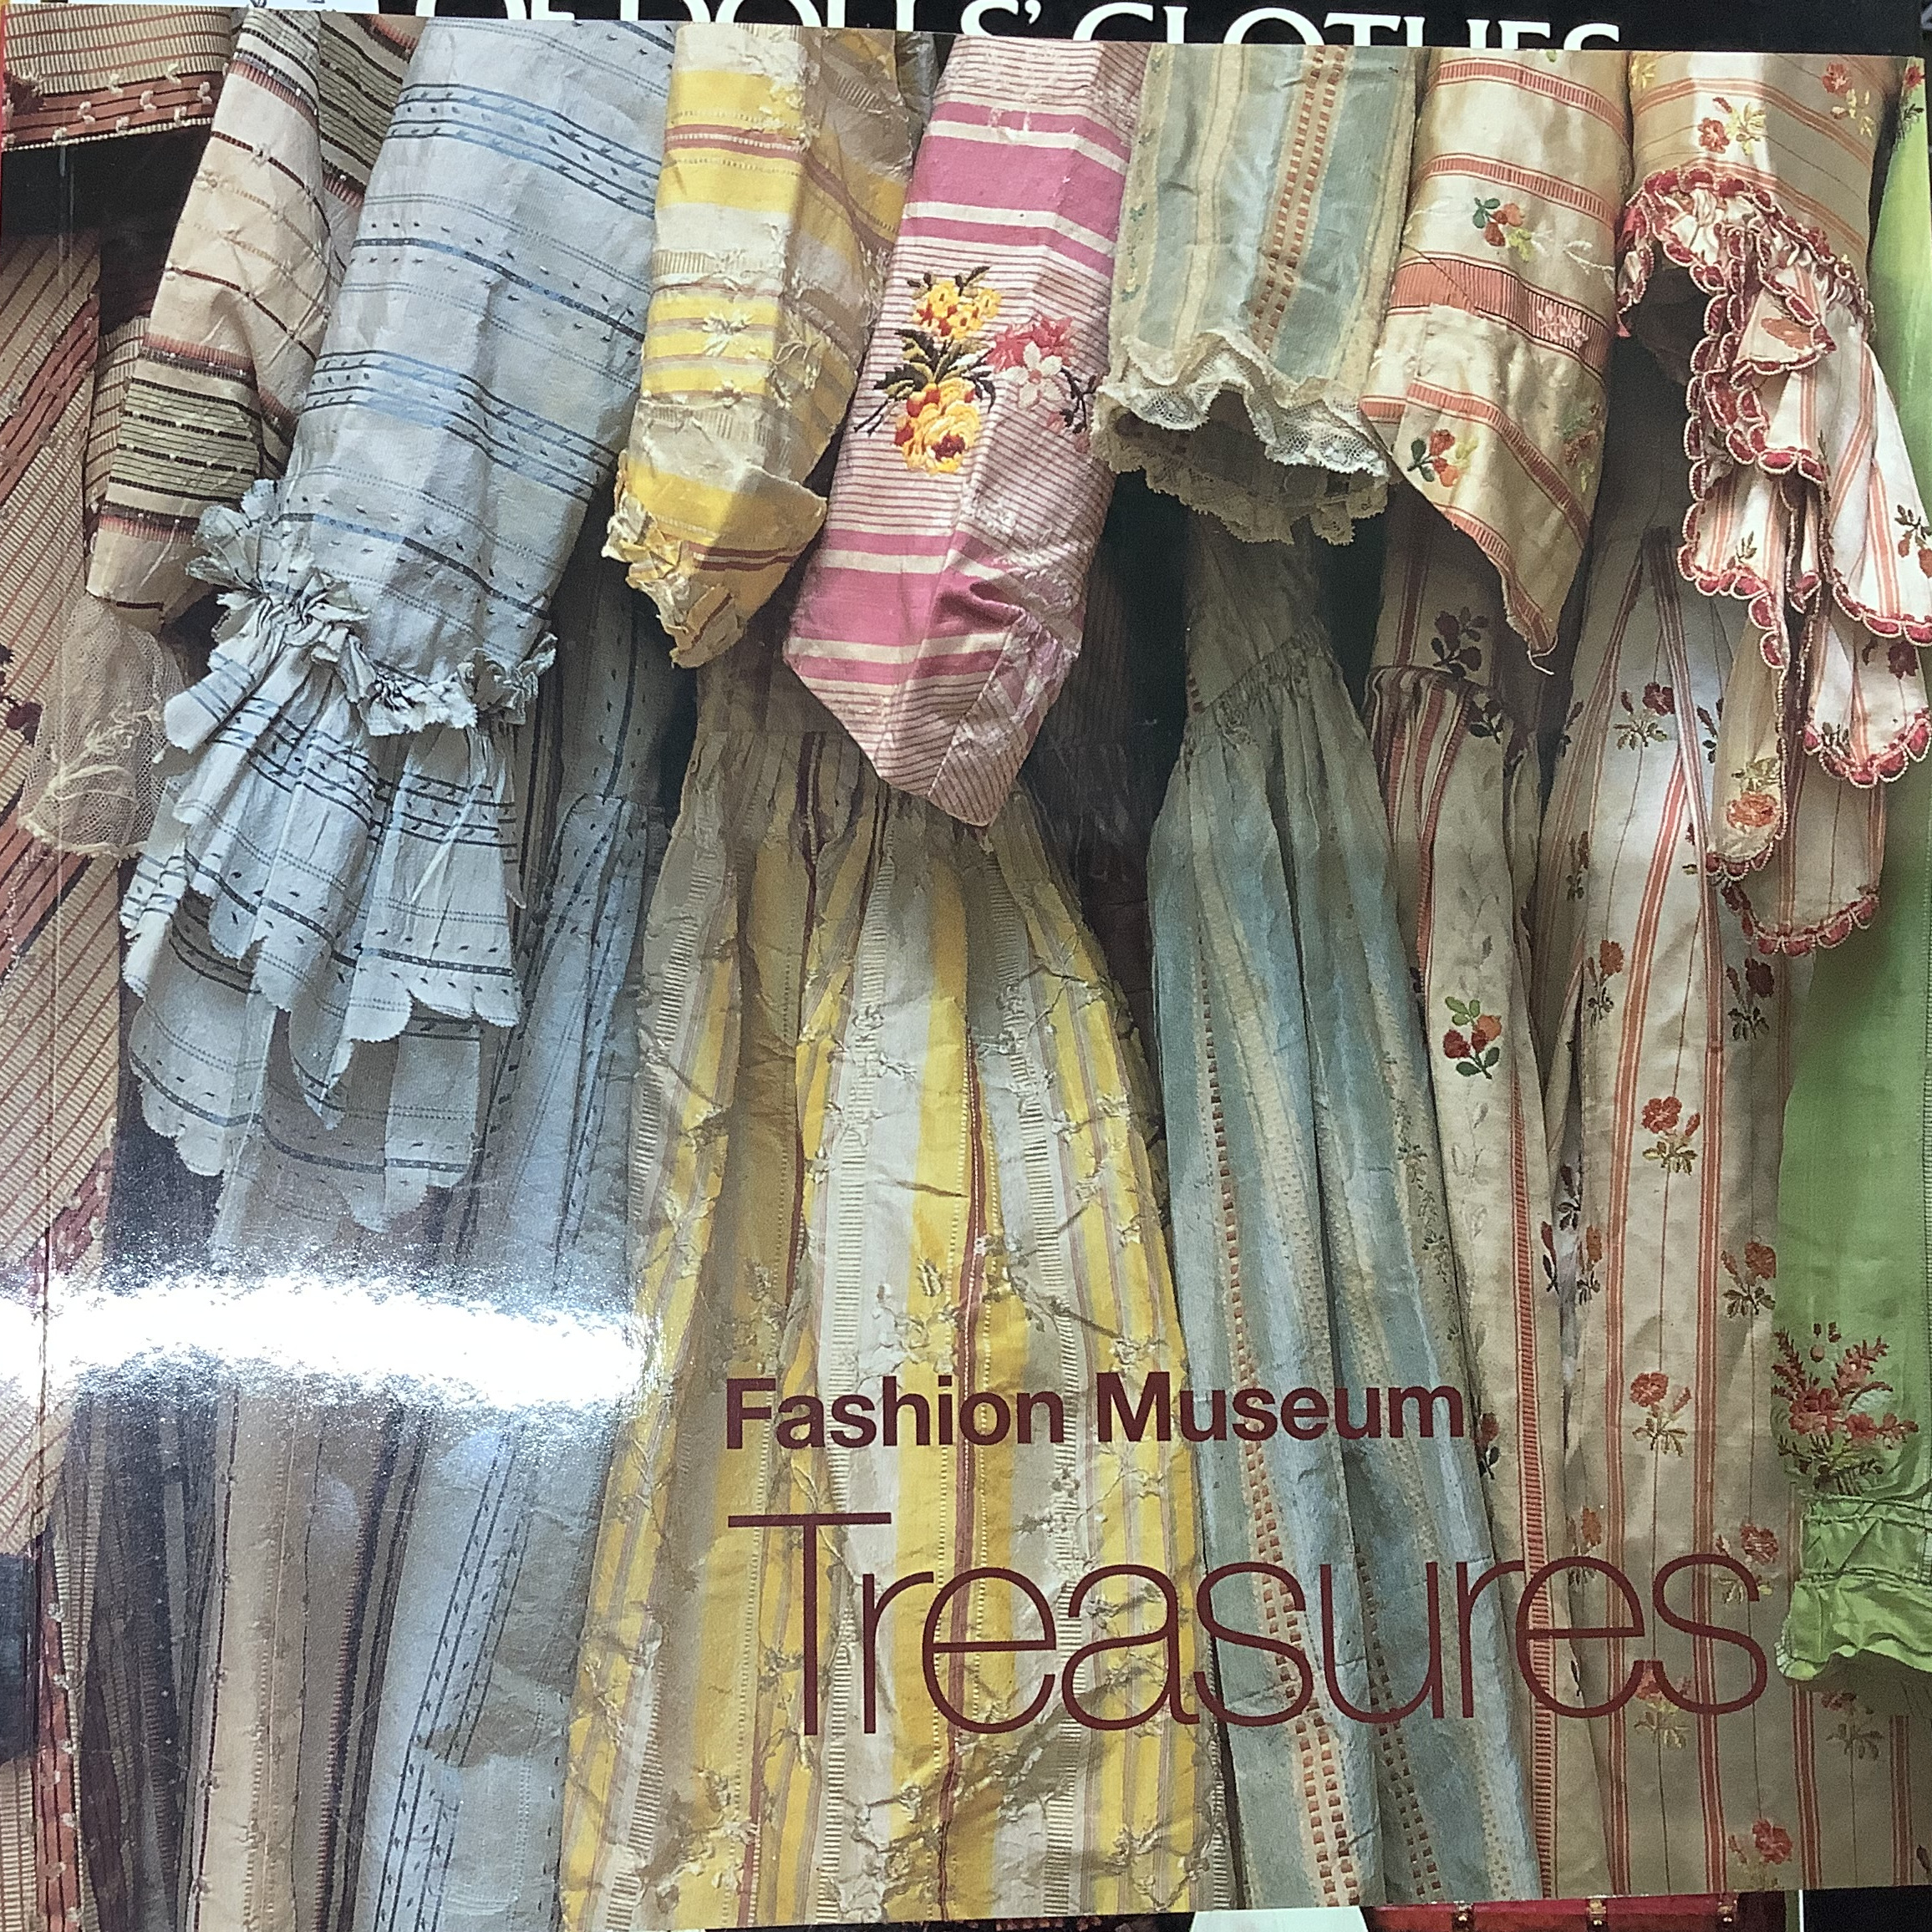 Book depicting a row of antique silk dresses viewed from the side